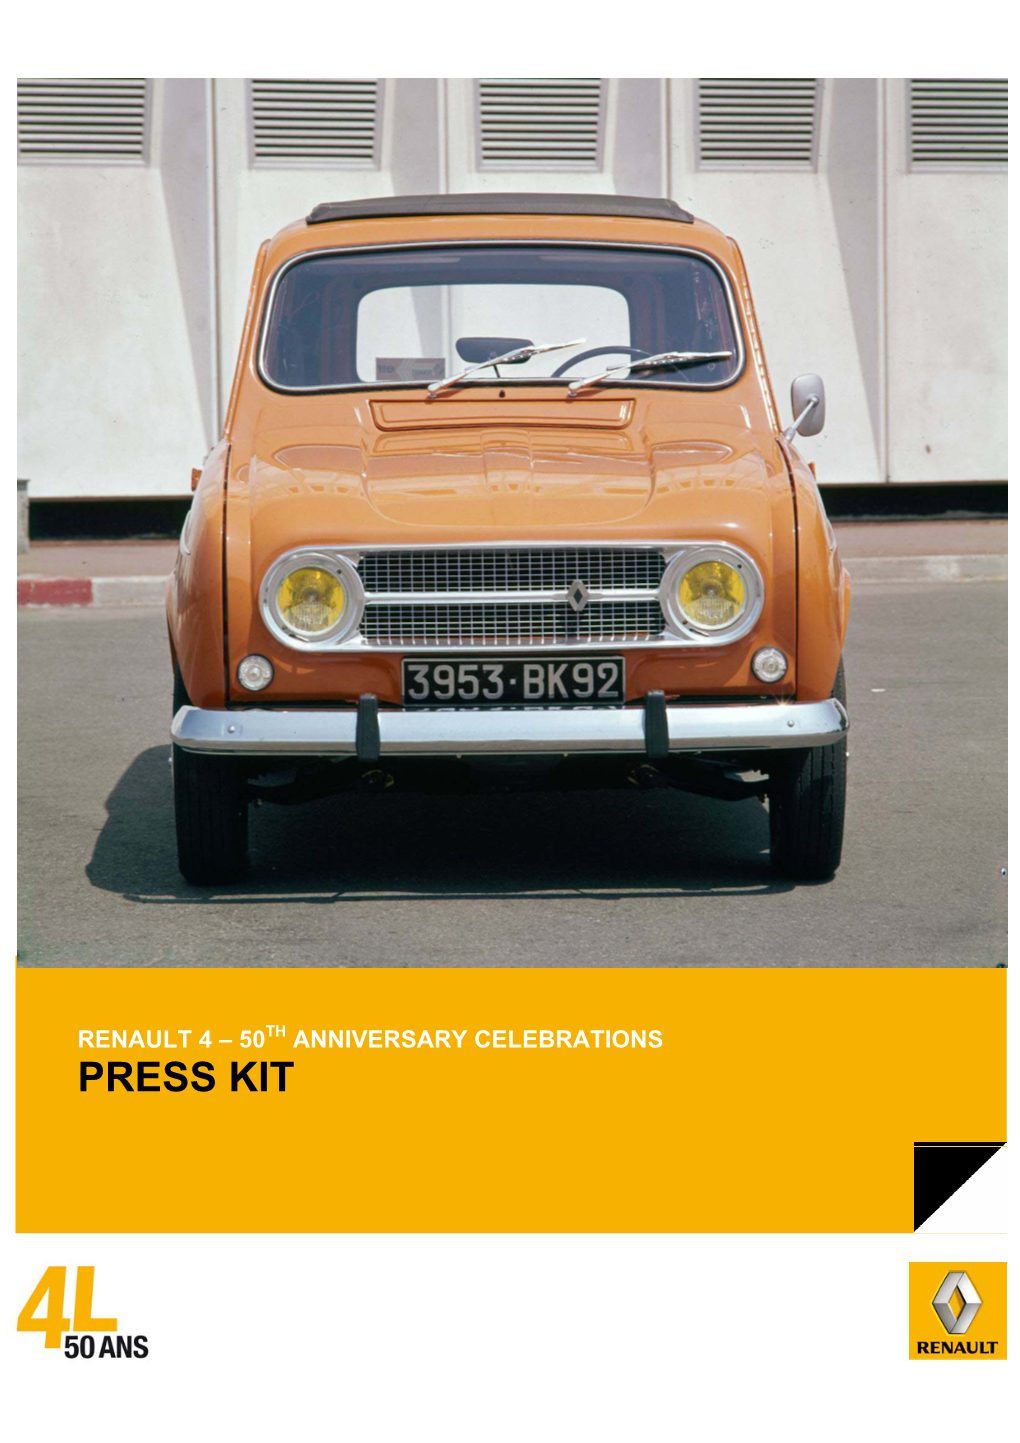 RENAULT 4 – 50TH ANNIVERSARY CELEBRATIONS PRESS KIT PRESS KIT Renault Histoire & Collection